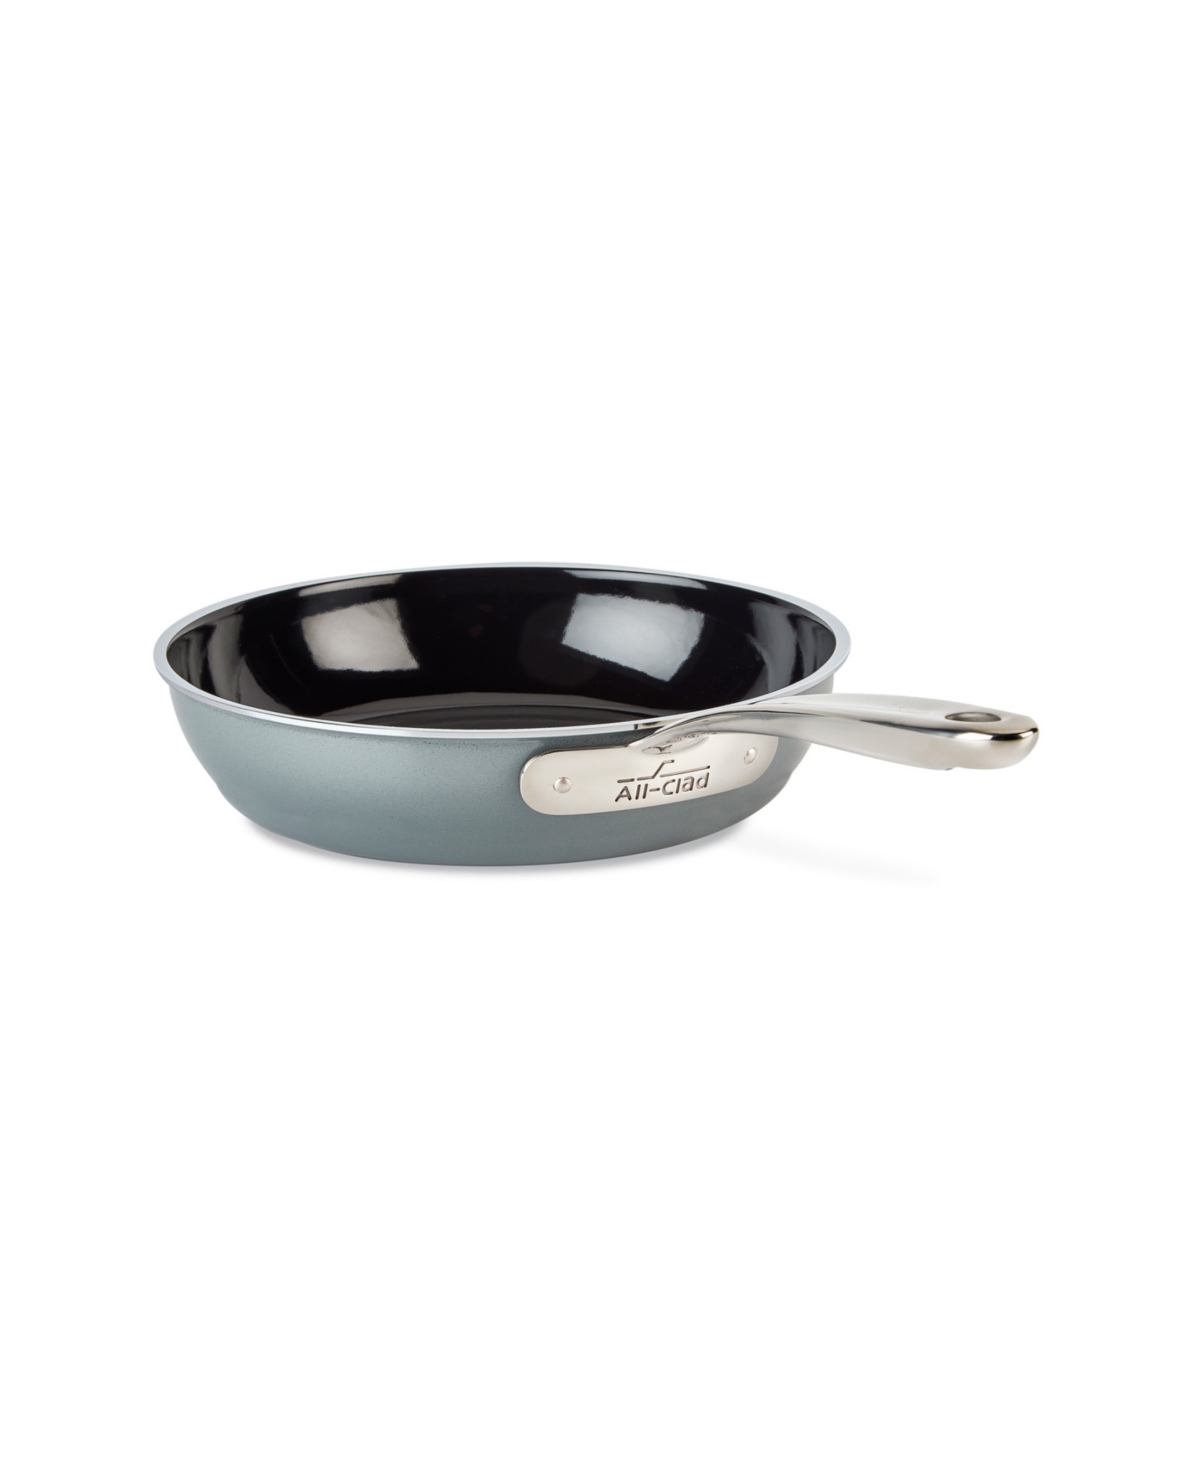 ALL-CLAD FUSIONTEC NATURAL CERAMIC WITH STEEL CORE 9.5" SKILLET